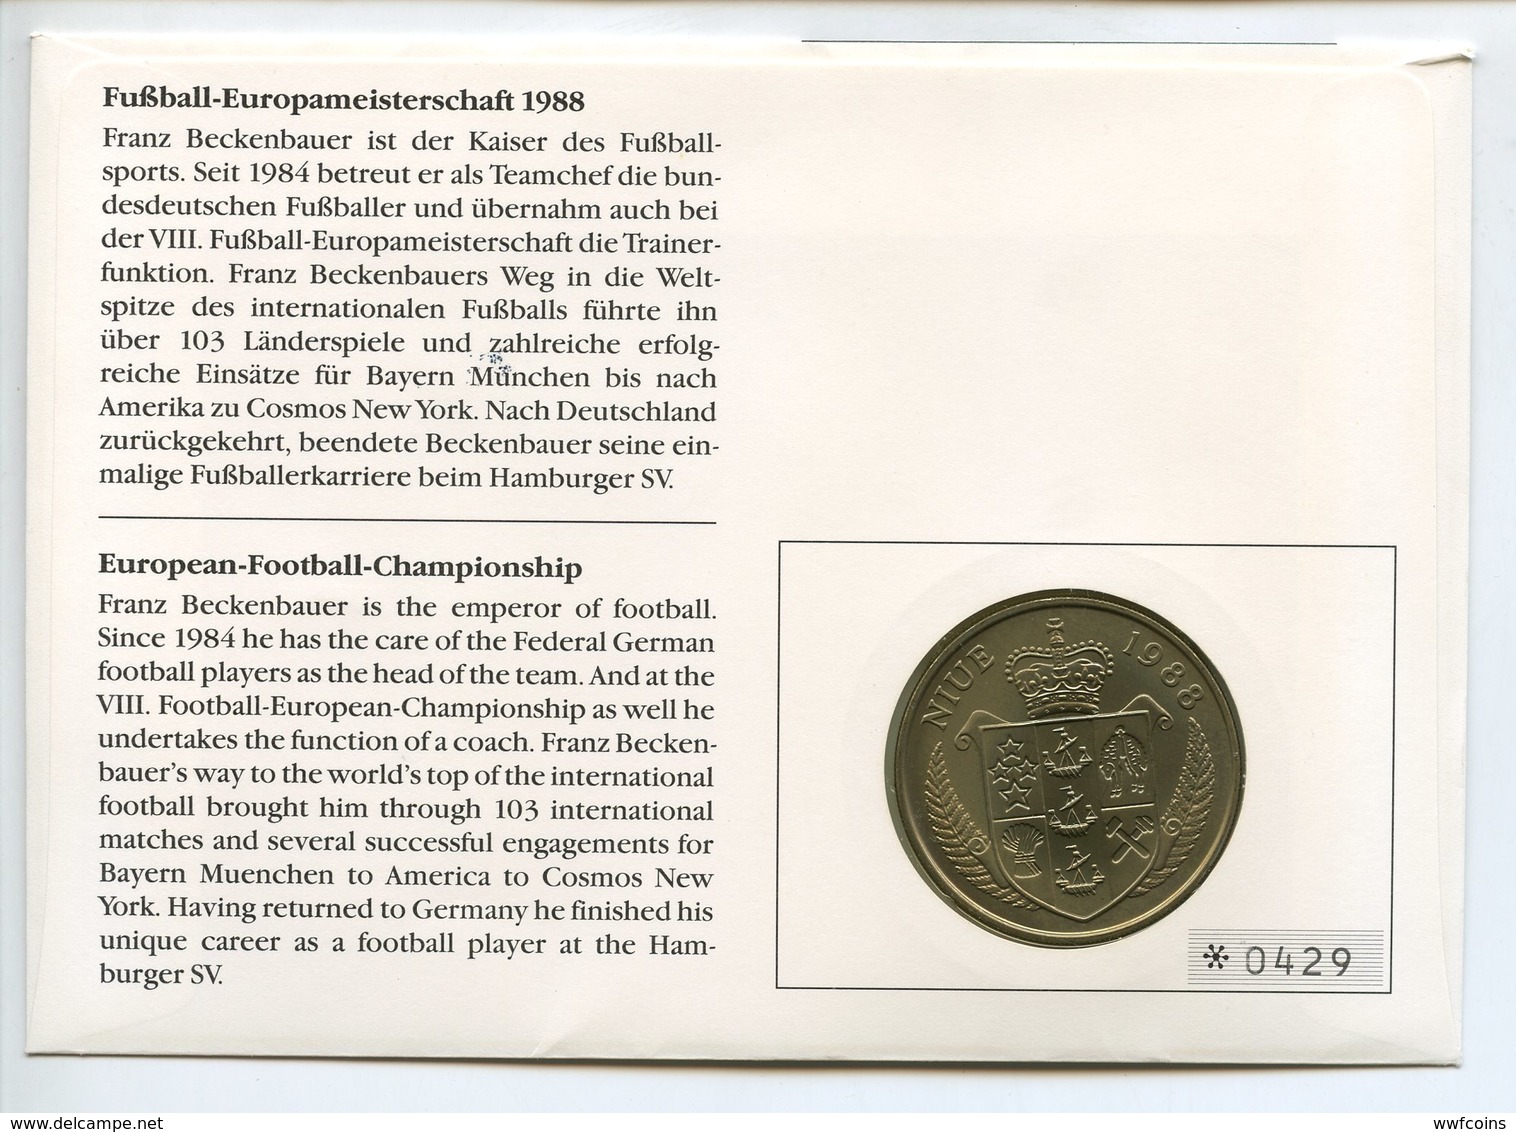 POSTCARD STAMP BUSTA FRANCOBOLLO NIUE 5 $ 1988 FOOTBALL CHAMPIONSHIP BECKENBAUER FRANZ FIRST DAY OF ISSUE FDC UNC (1) - Niue